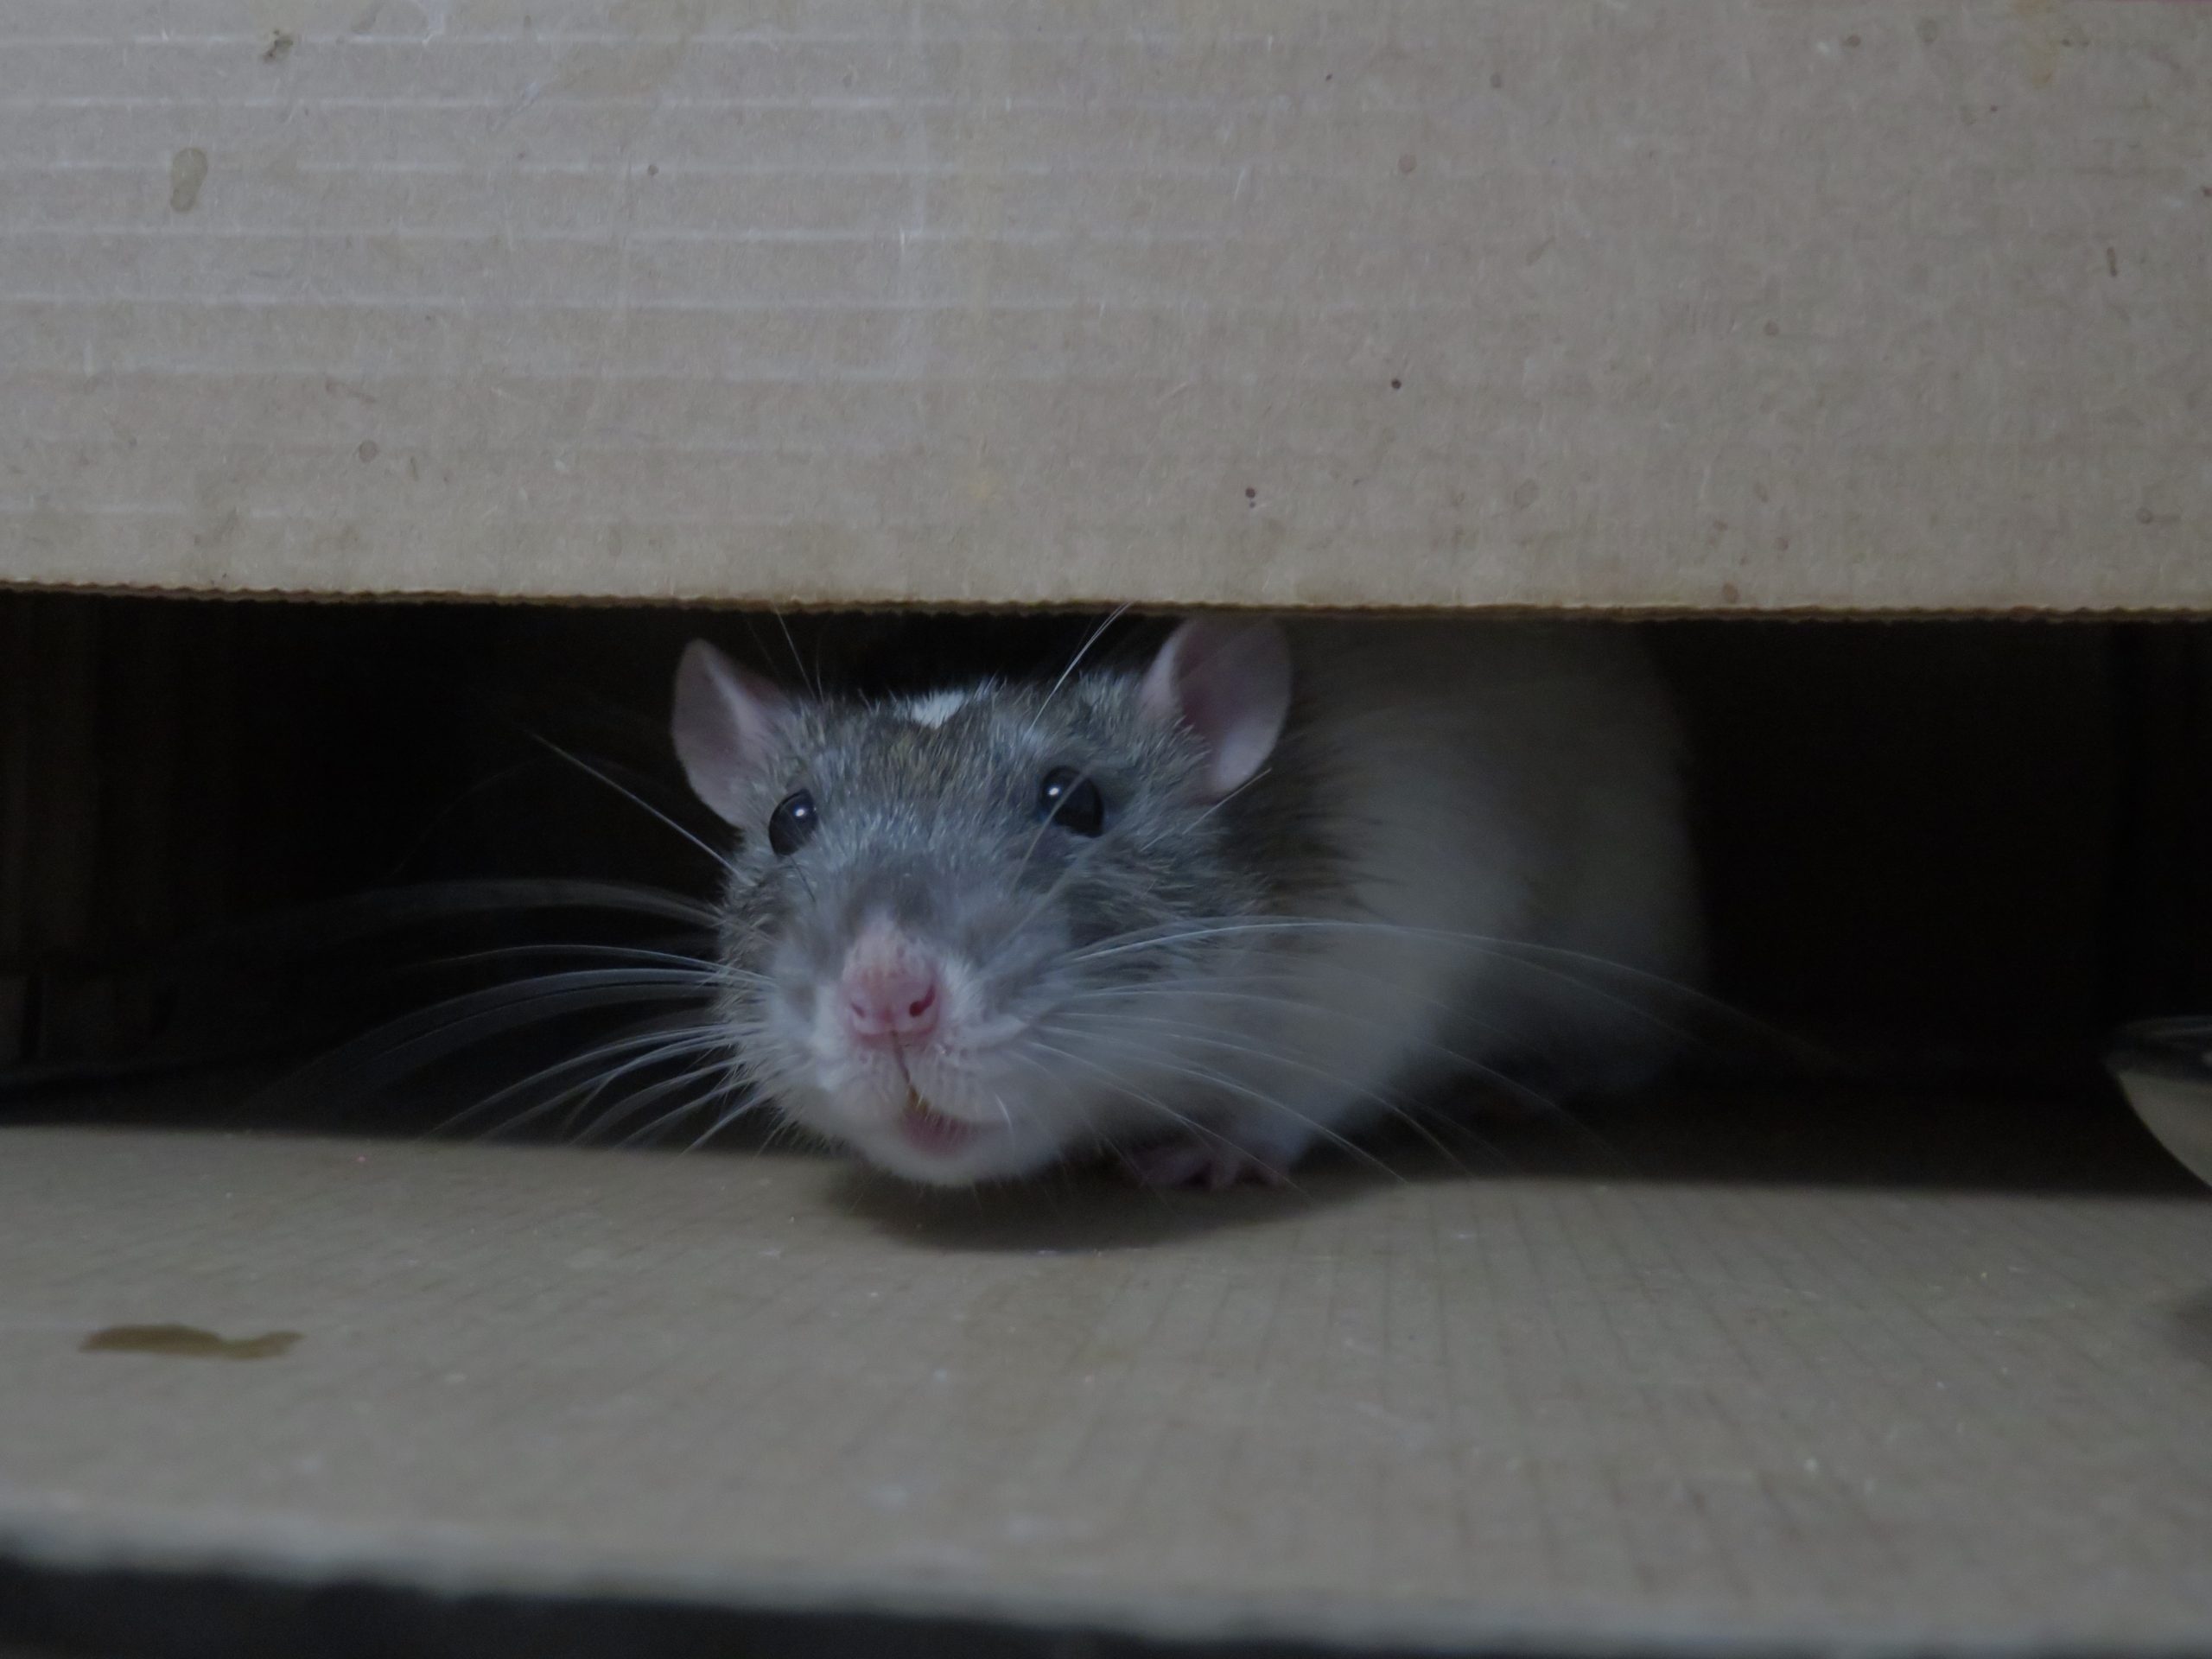 What’s the best way to get rid of rats in your house?